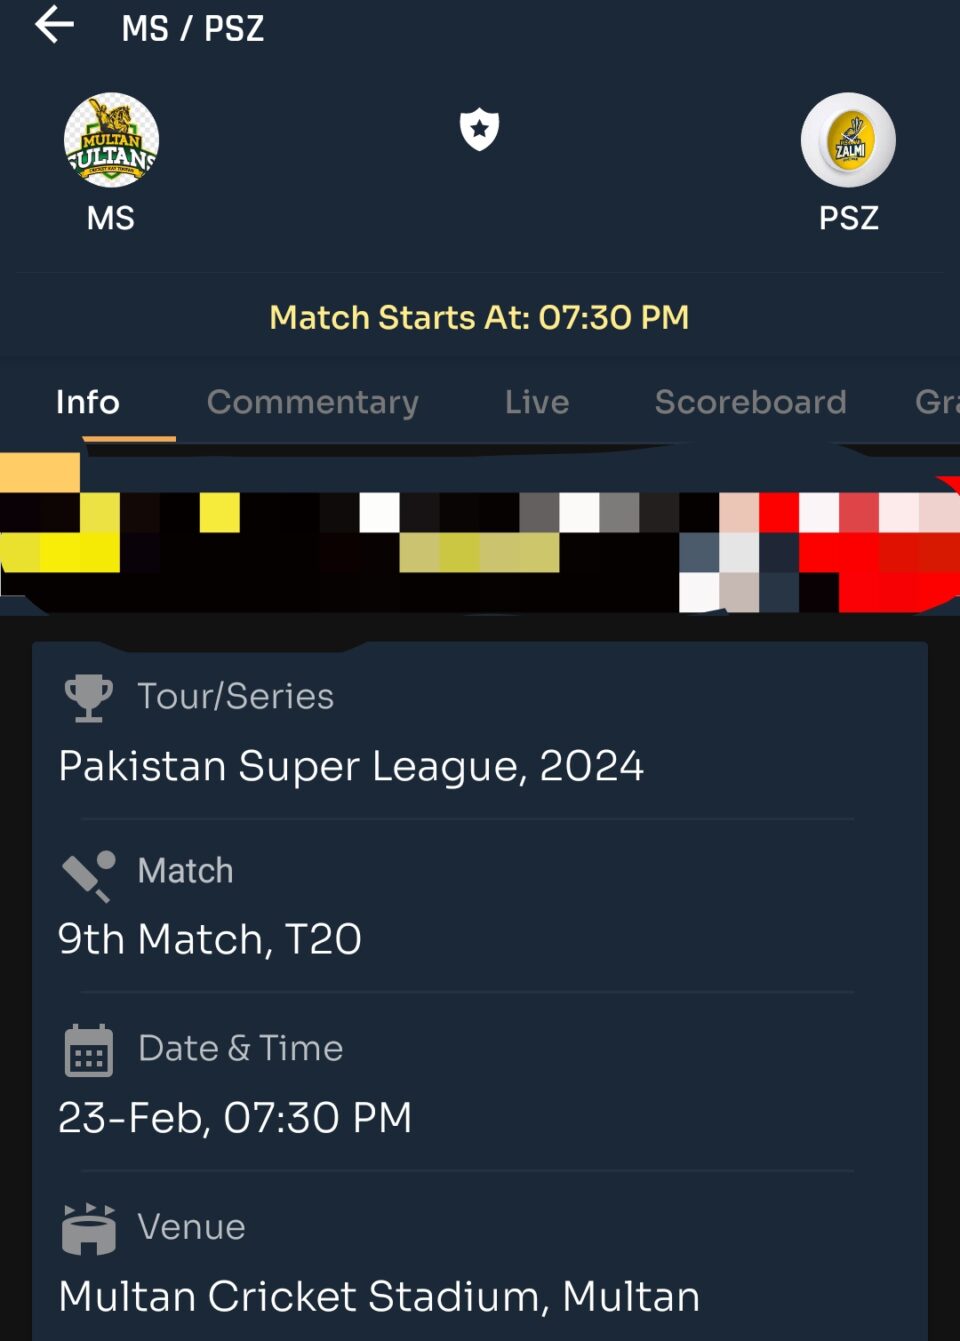 Today PSL Prediction | Match Number 9| MS vs PSZ| Toss and Match Analysis | Pitch & Weather Reports